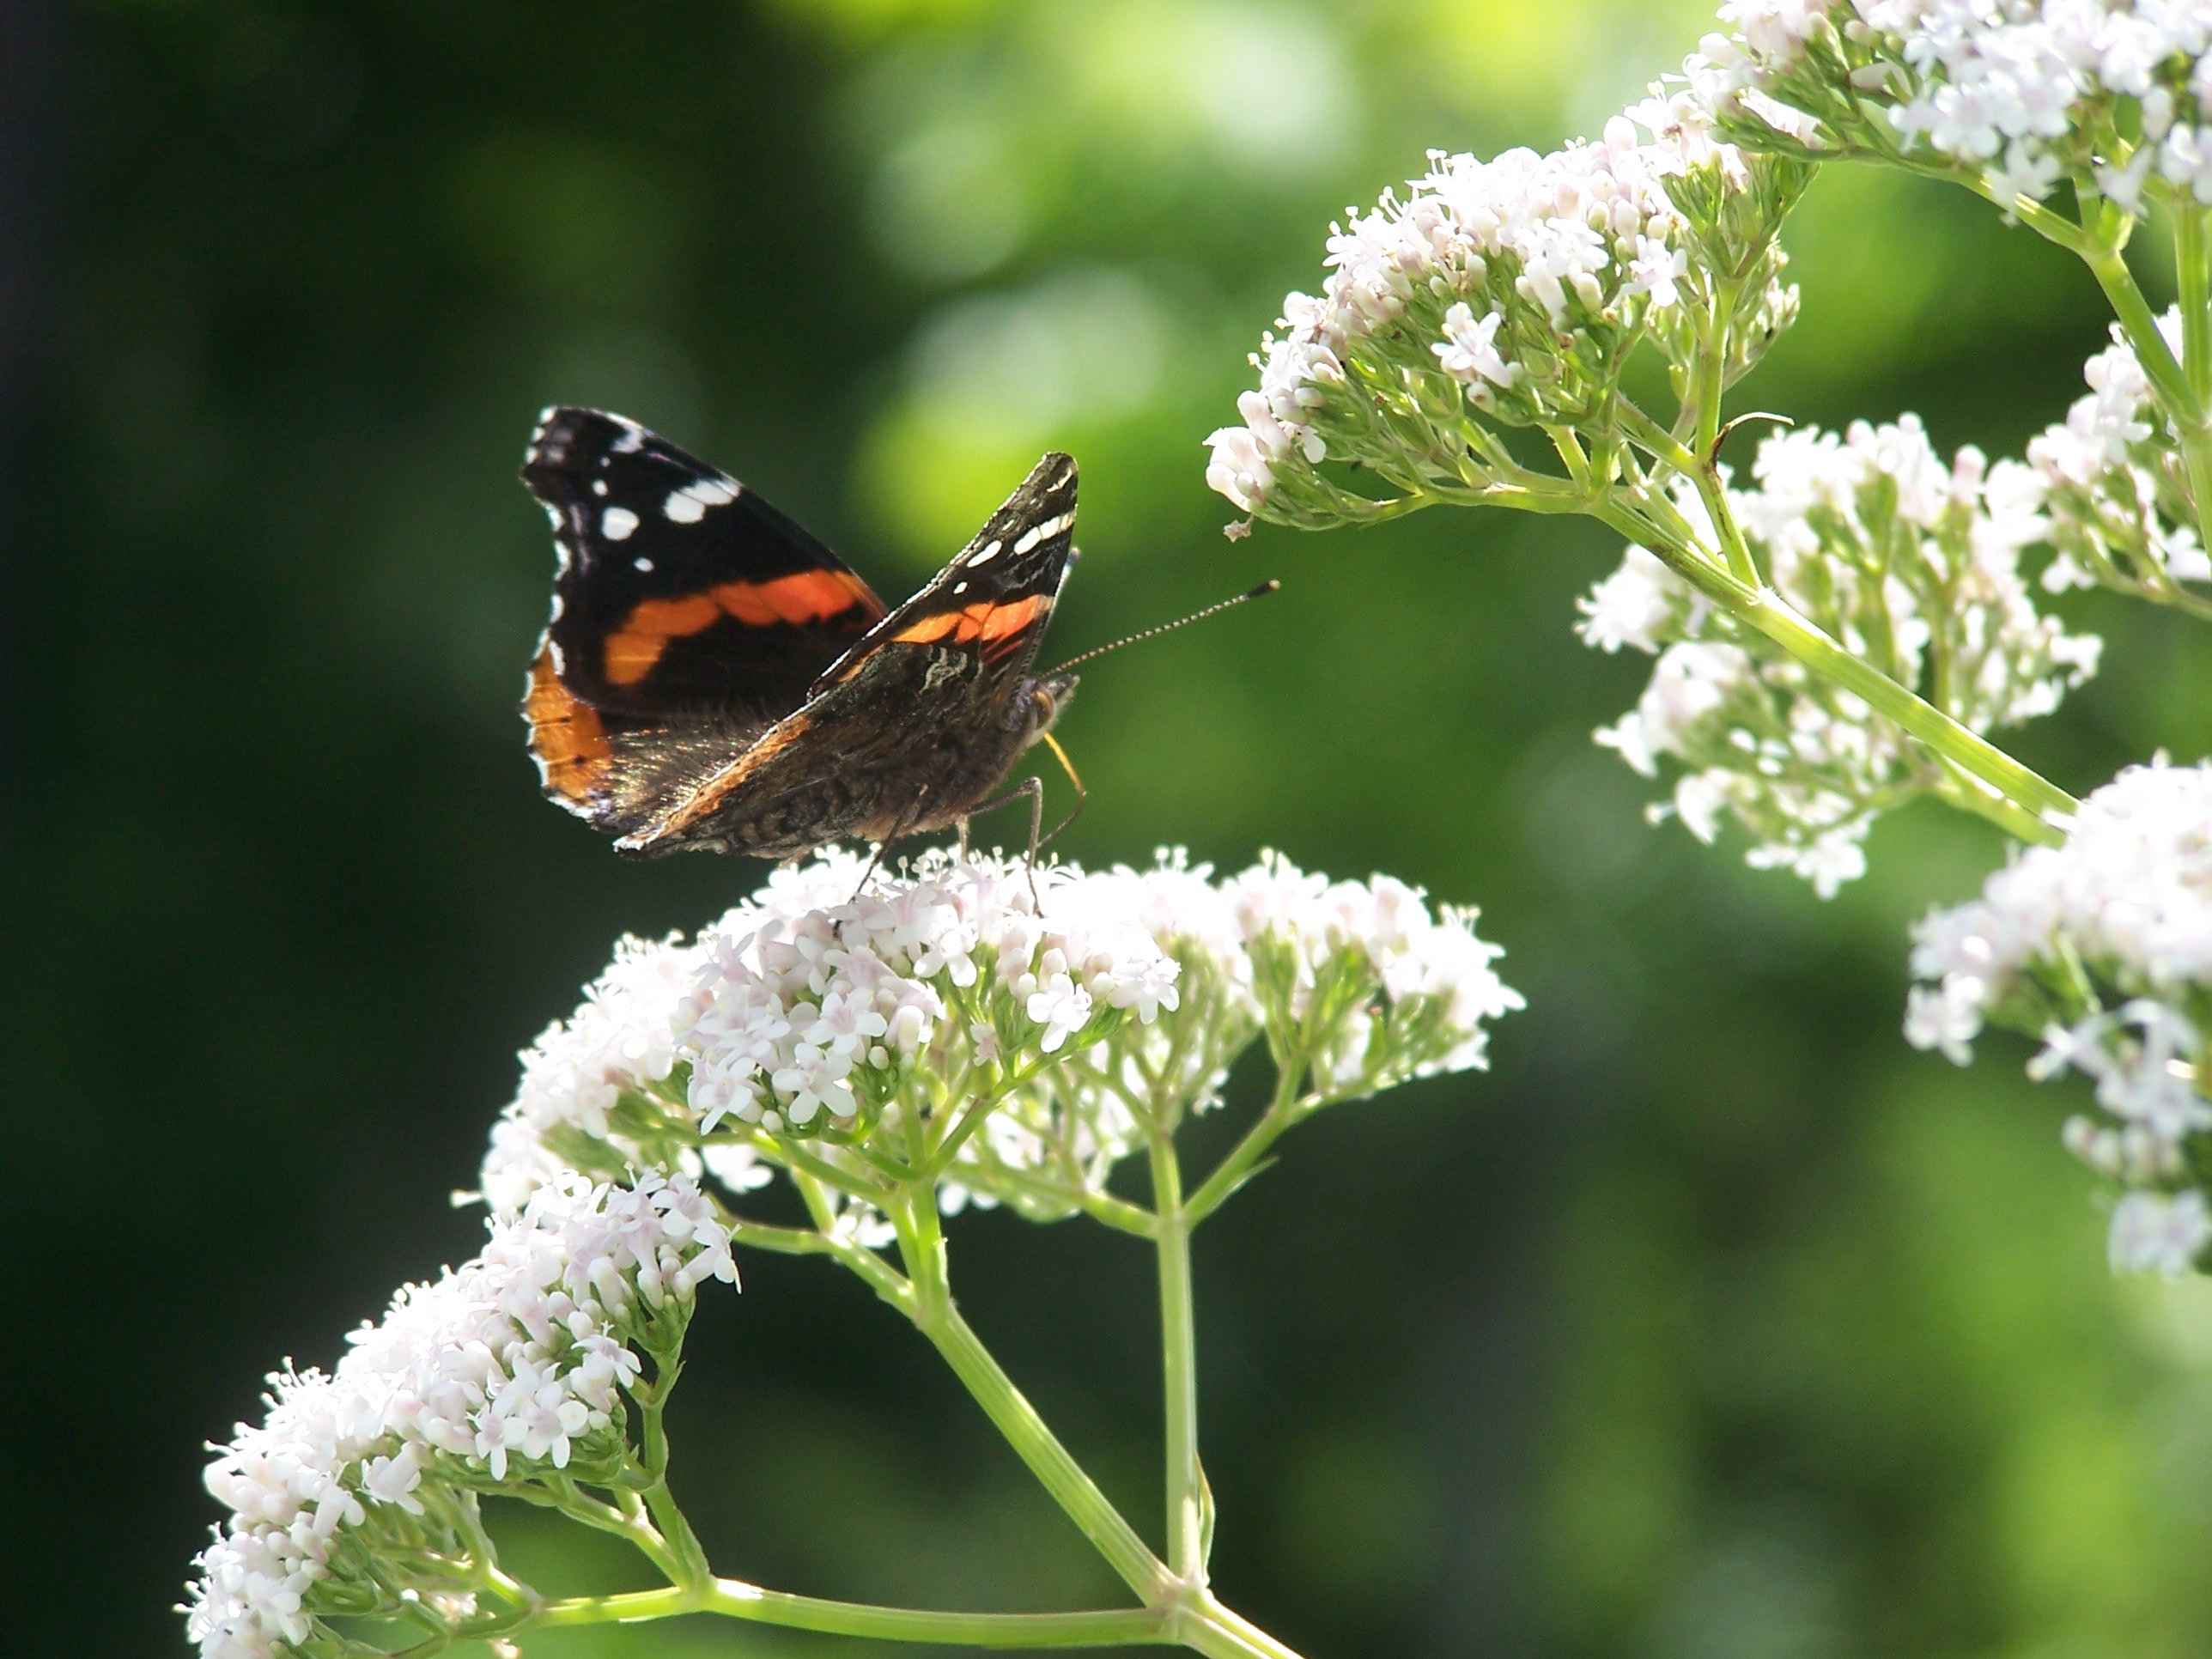 Valerian herb plant is providing nectar to a hungry butterfly.